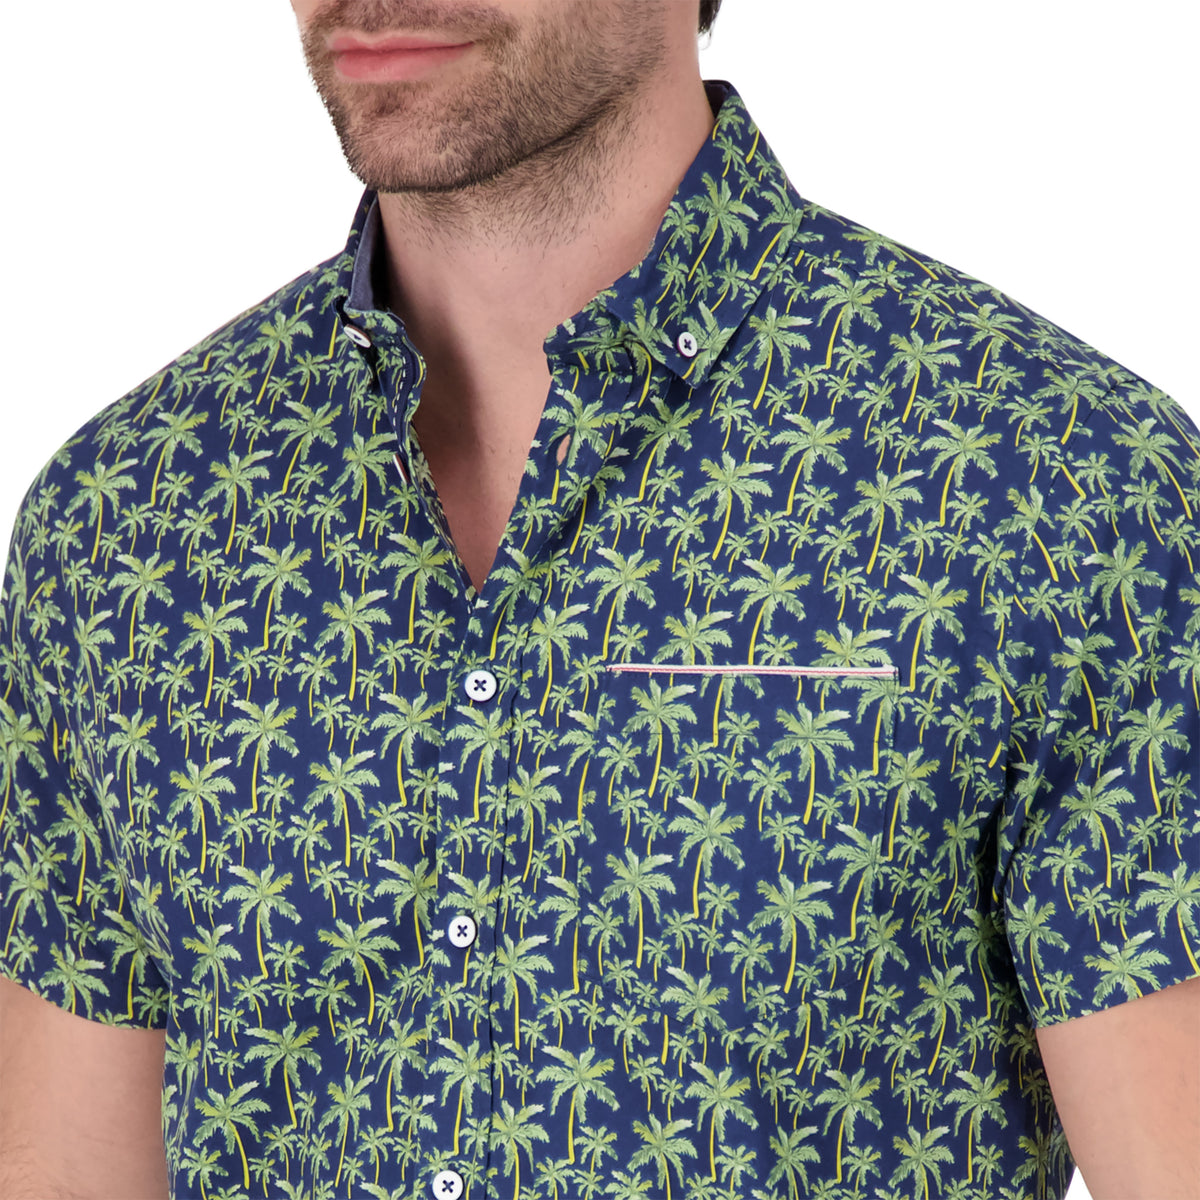 Model Front Up Close View of Short Sleeve Shirt with Palm Tree Print in Navy